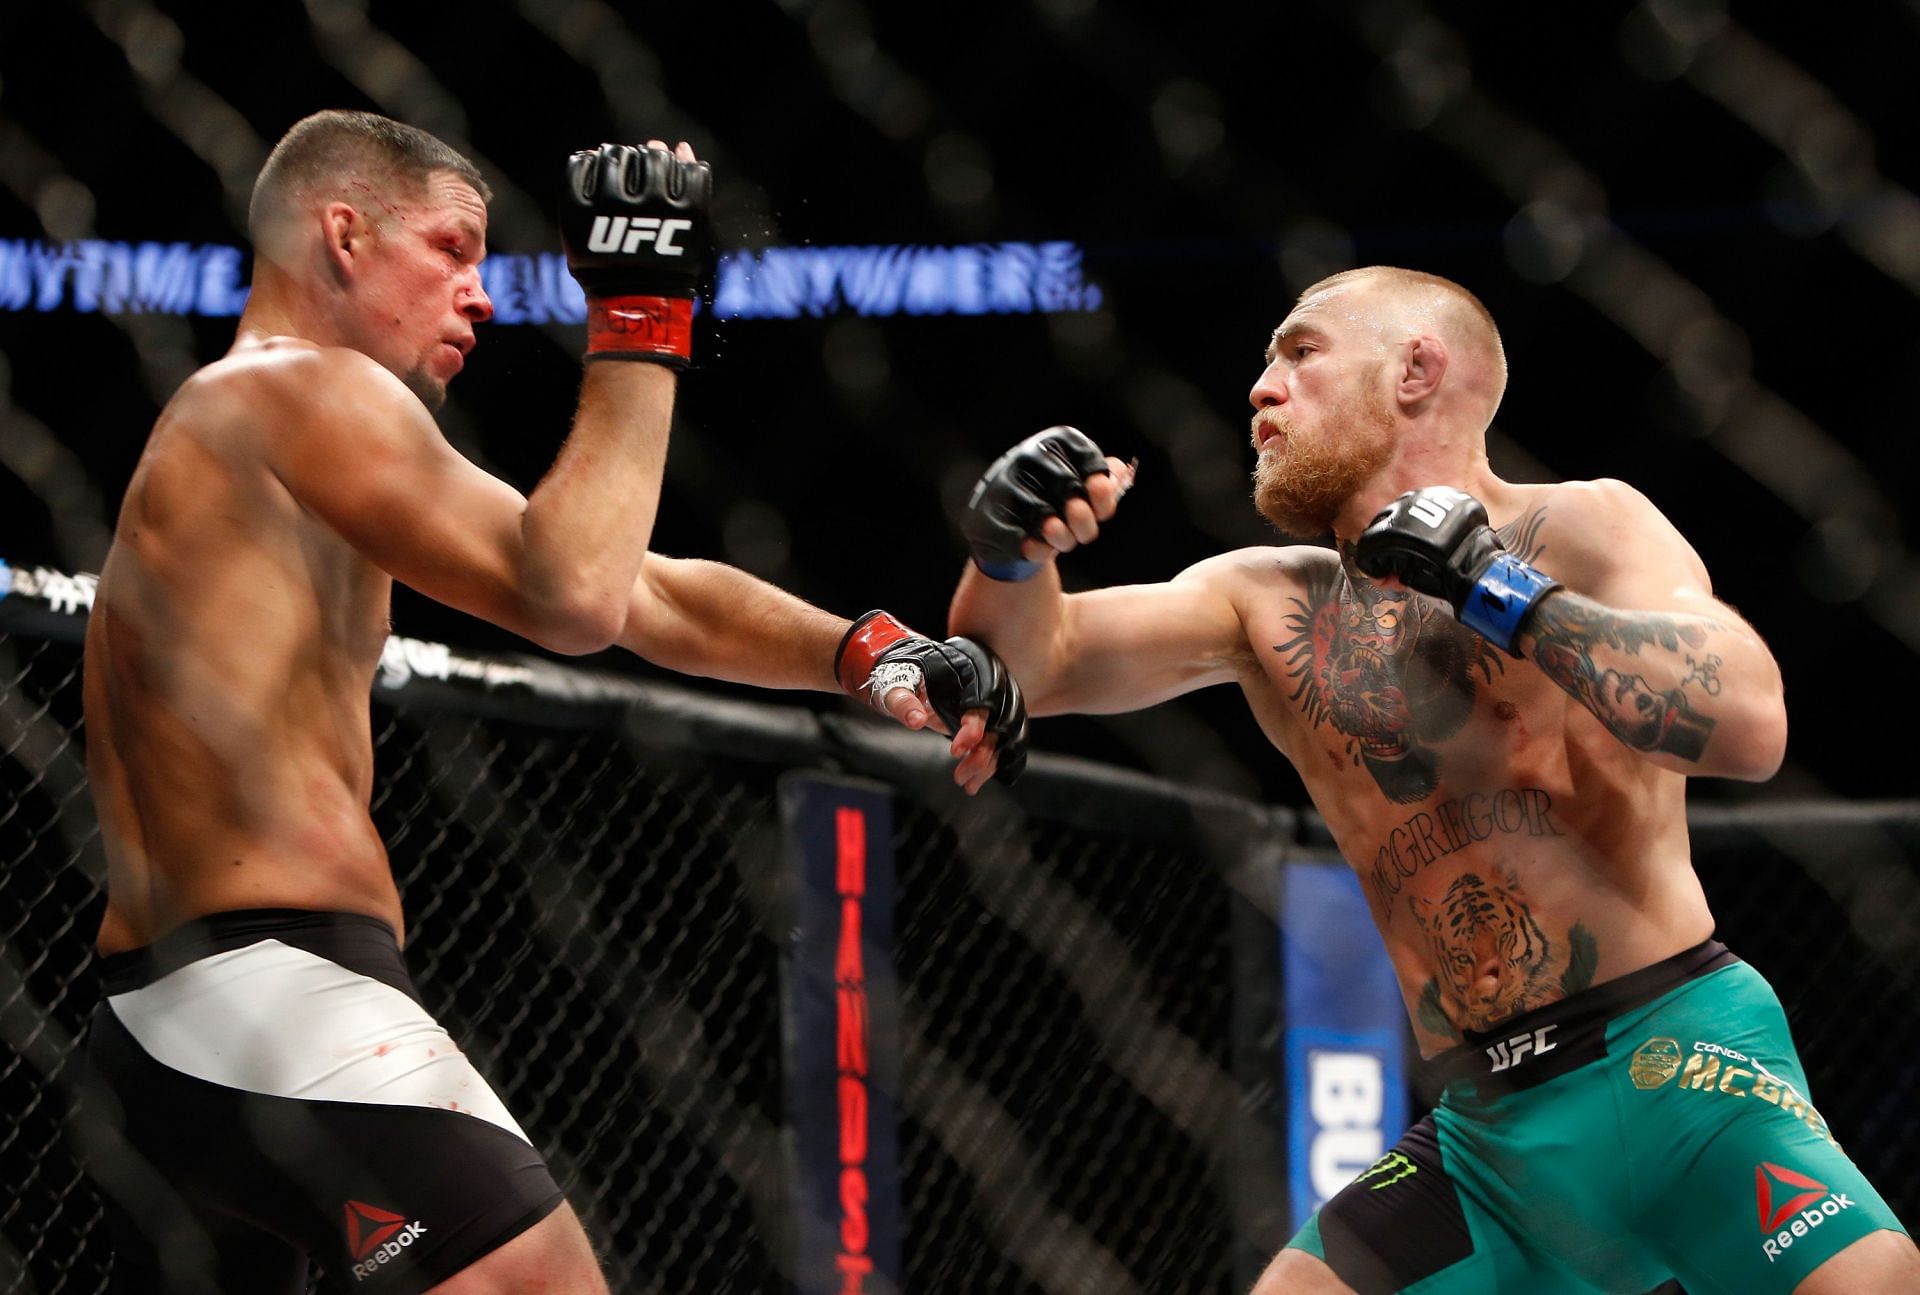 The series between McGregor and Diaz is tied at 1-1